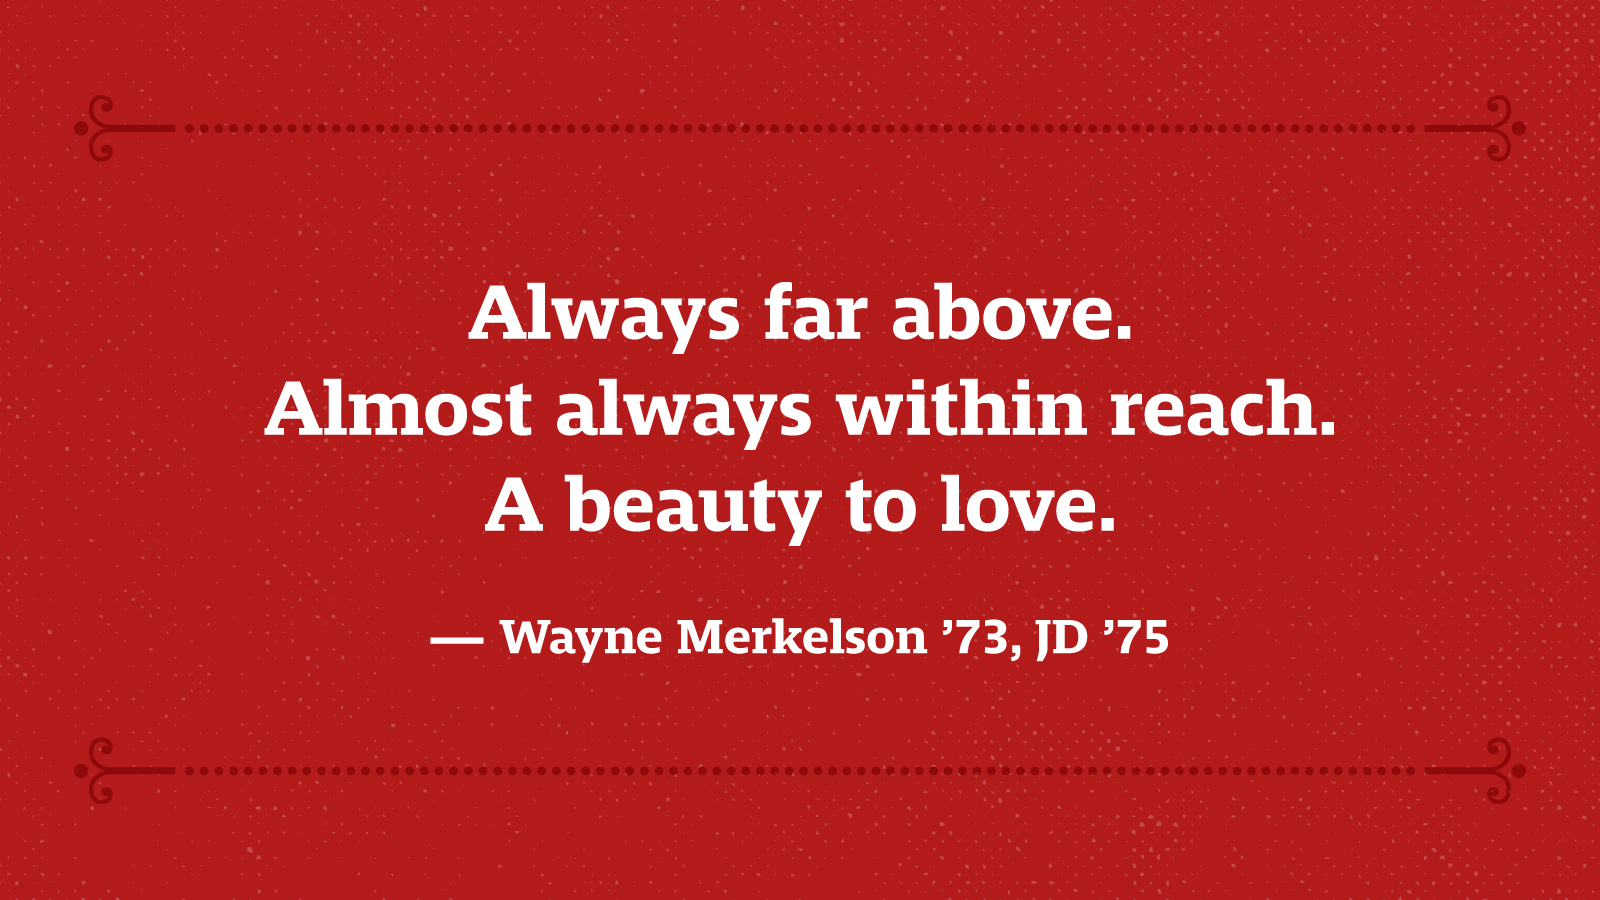 Always far above. Almost always within reach. A beauty to love. — Wayne Merkelson ’73, JD ’75